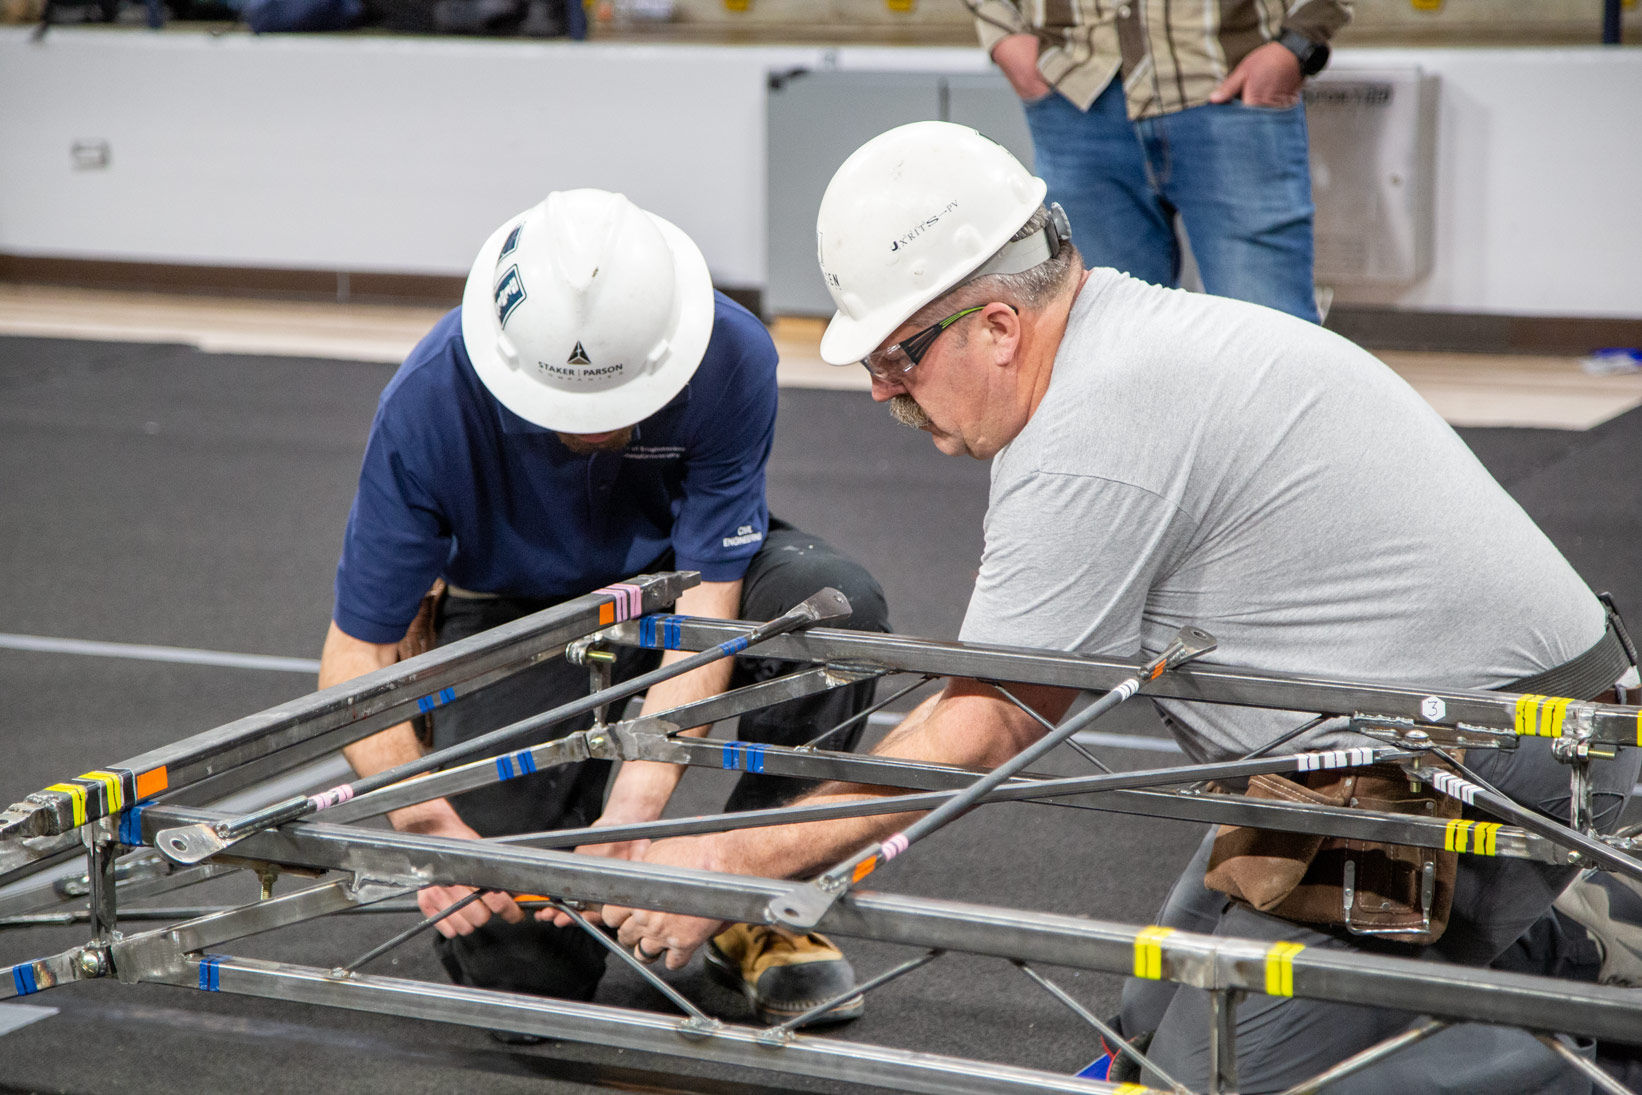 The Student Steel Bridge Competition challenges students to extend their classroom knowledge to a practical and hands-on steel-design project.